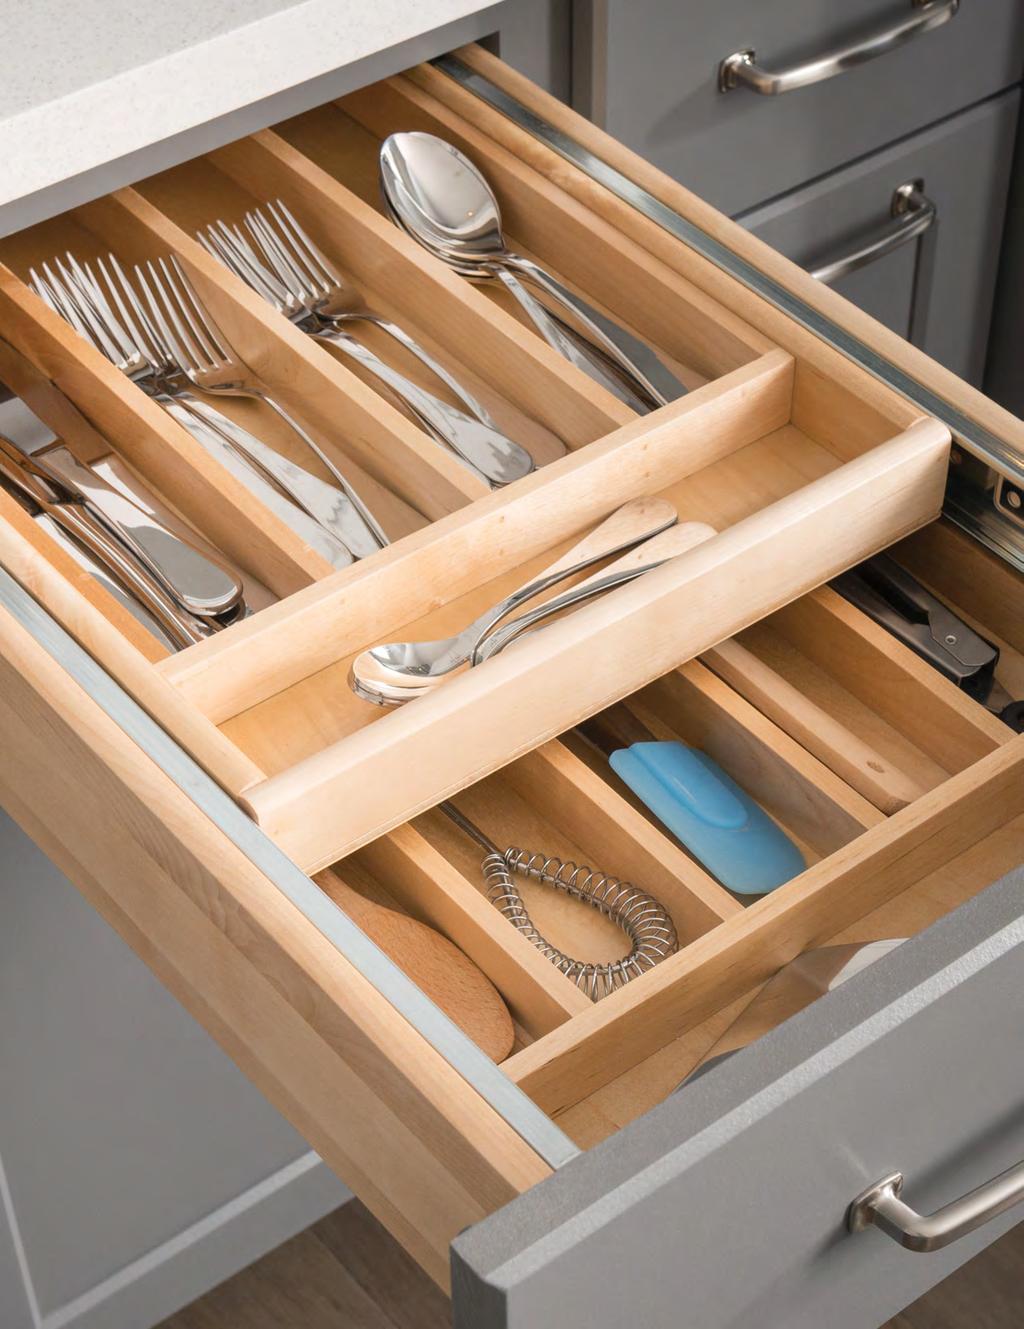 Cabinet Drawer Solutions [ 354 ]